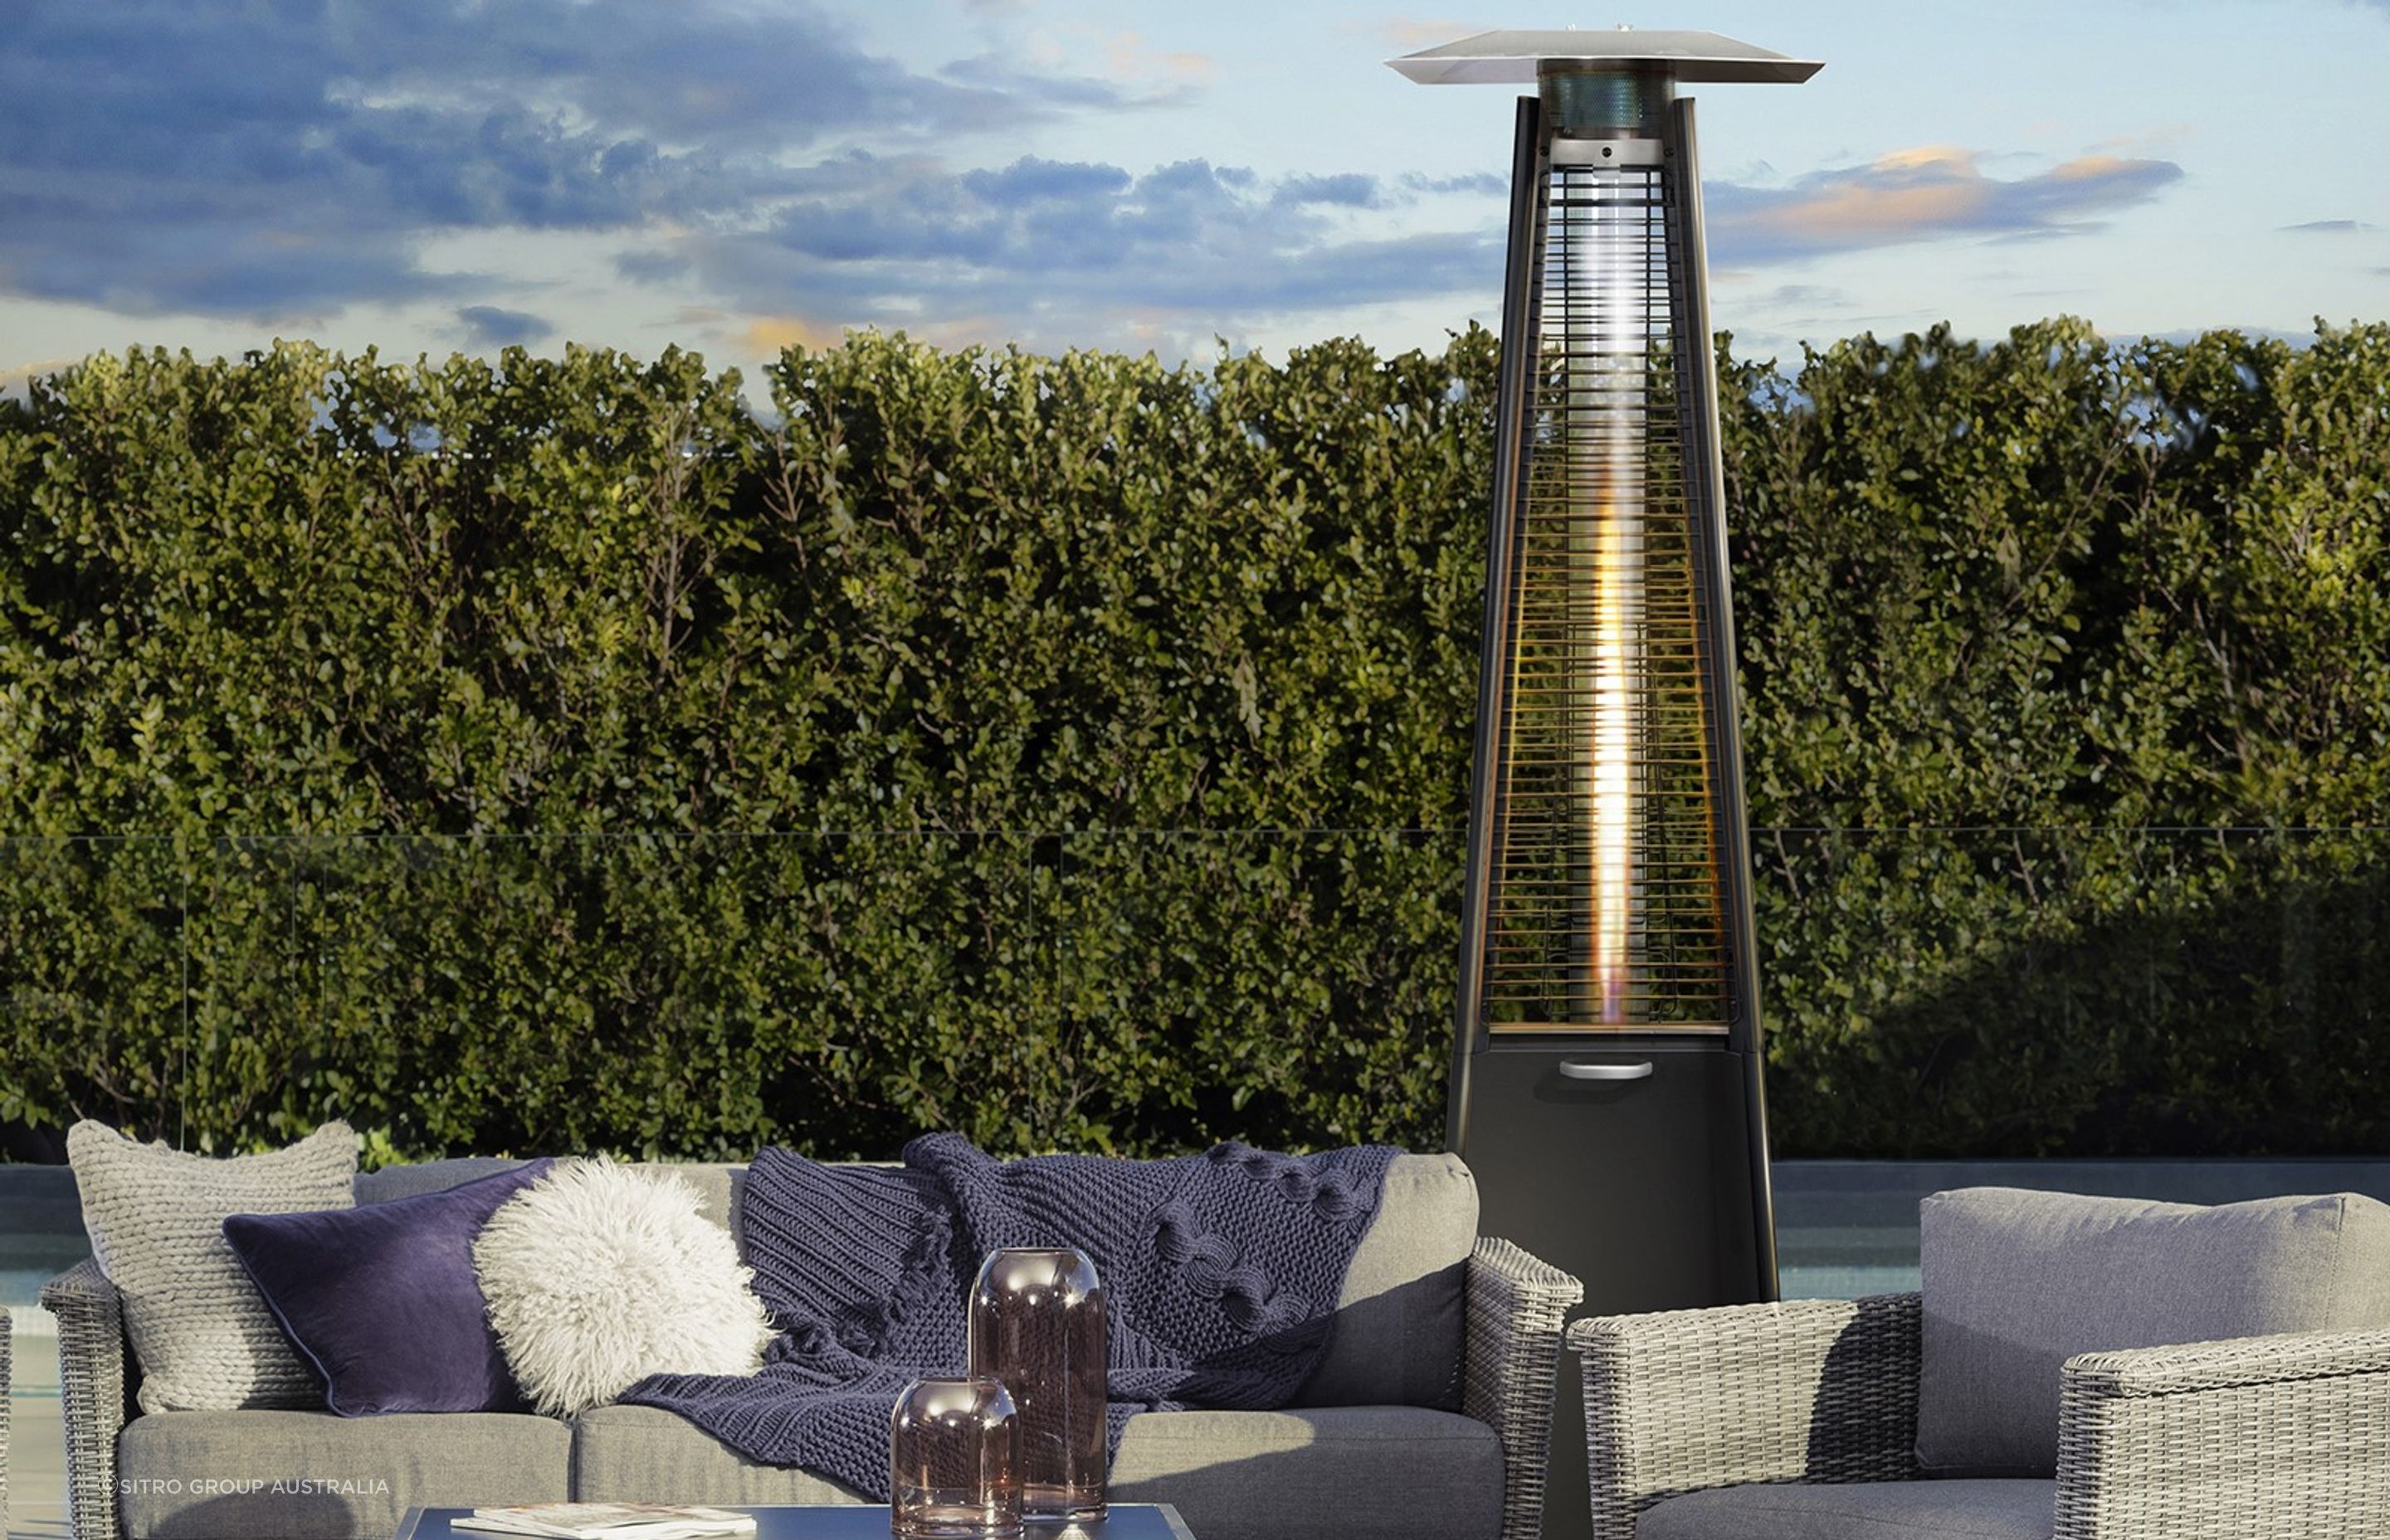 The sophisticated Gasmate Stellar Black Pyramid Heater will keep everyone warm on those cool evenings